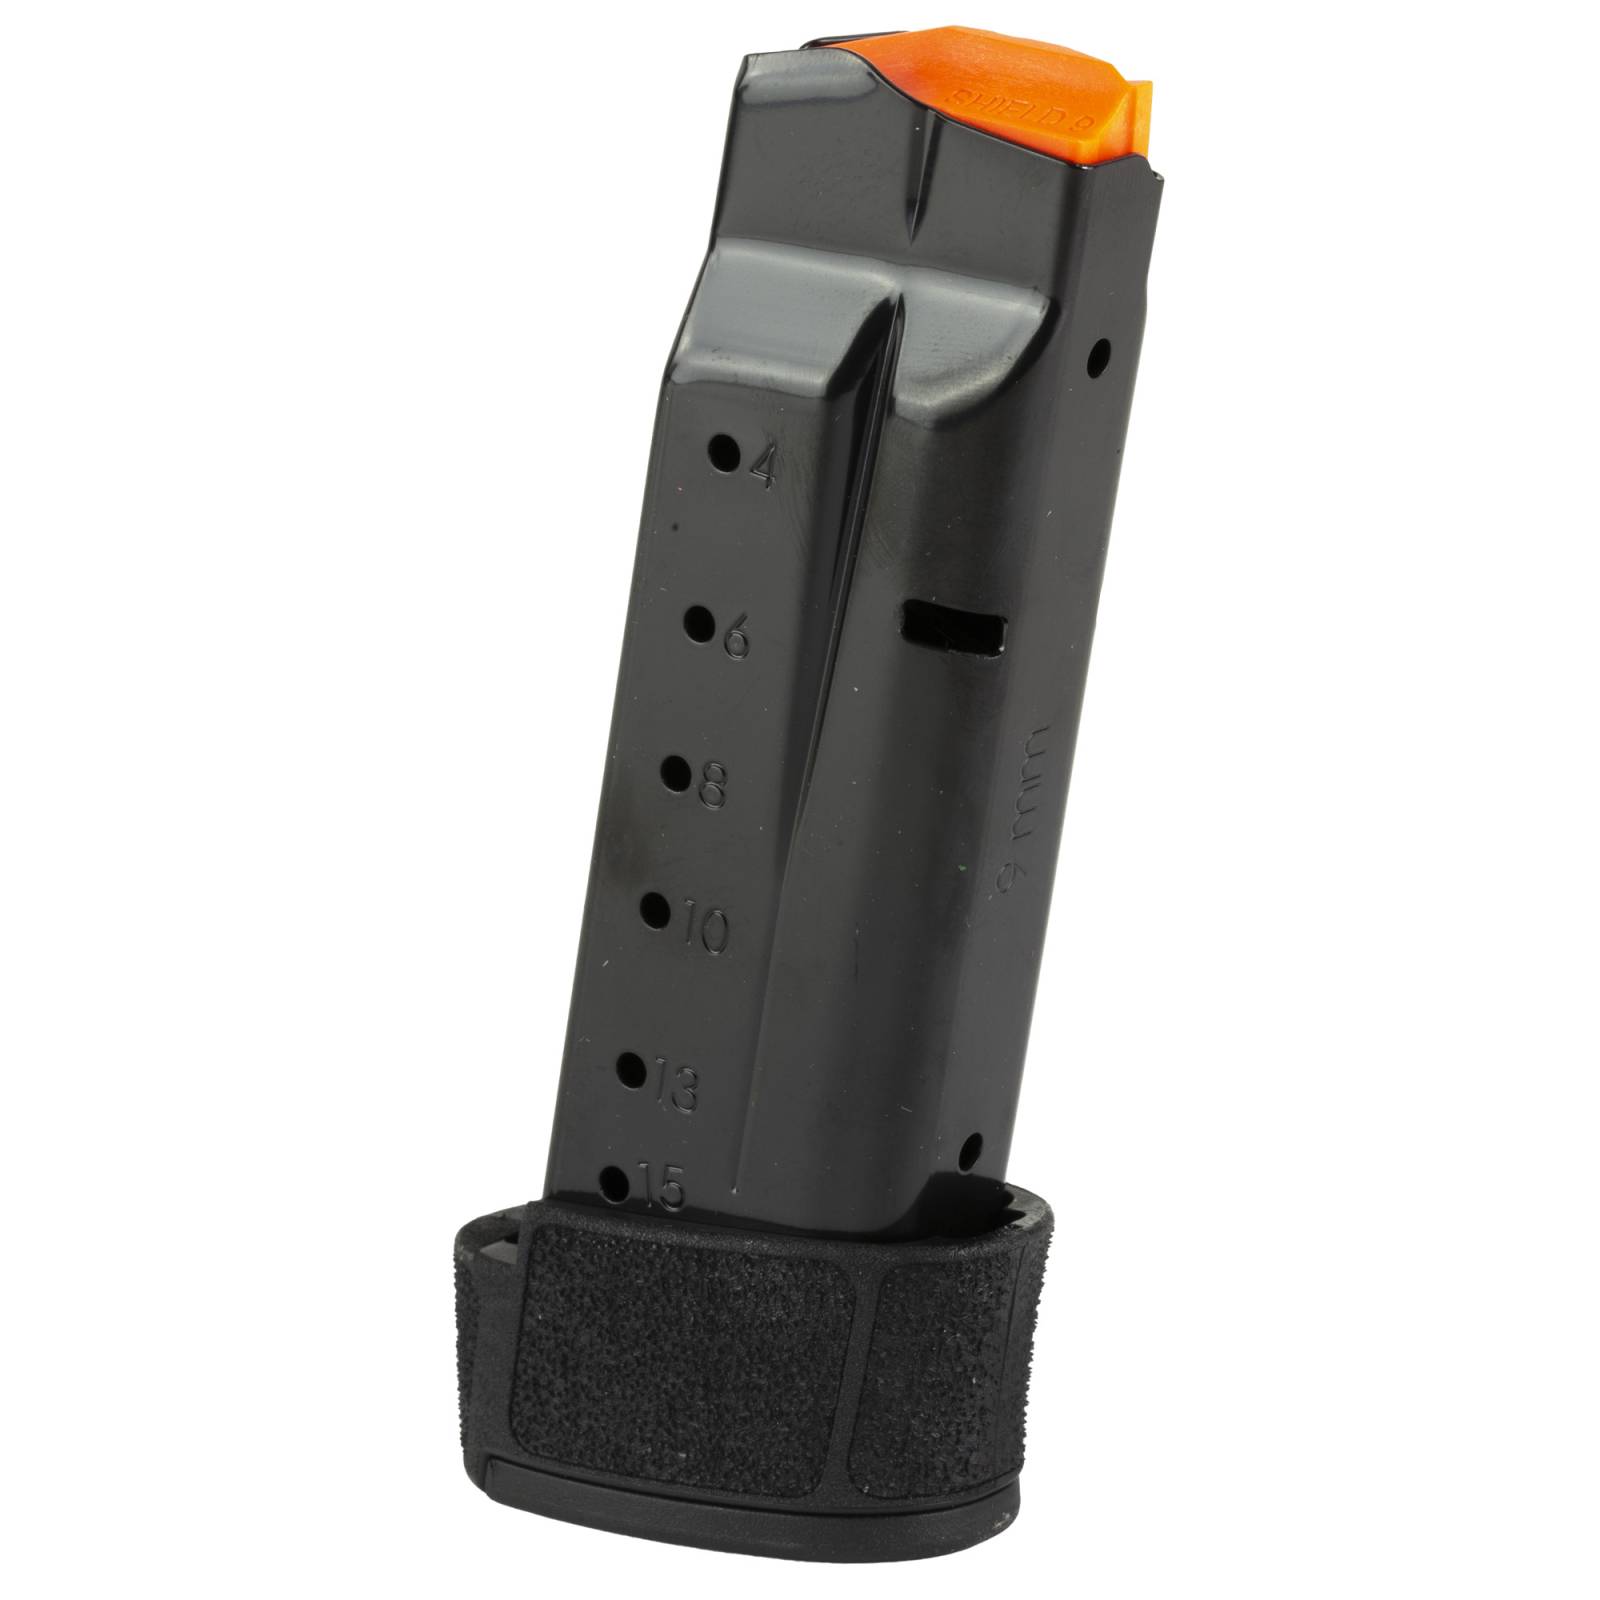 Smith and Wesson Equalizer/Shield Plus 9mm 15rd Magazine